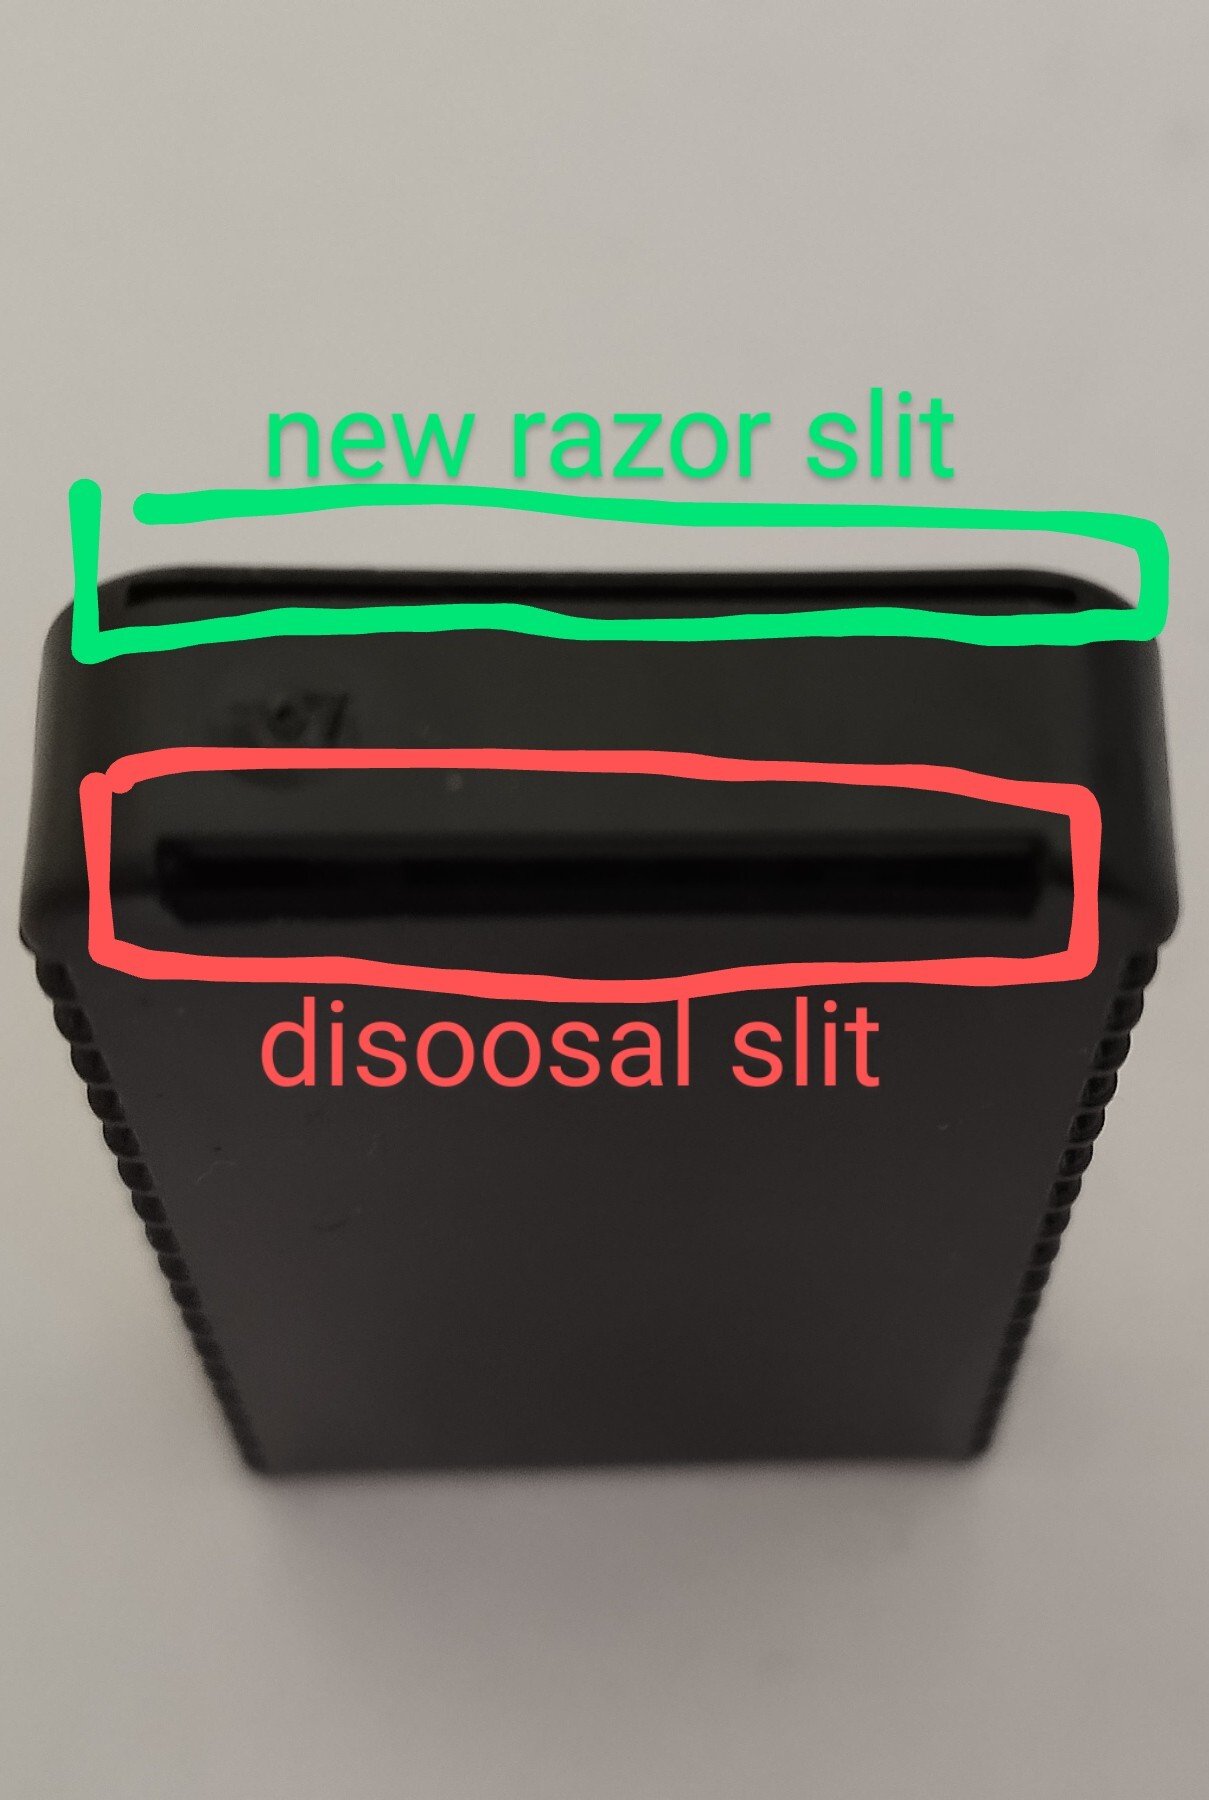 back view of razor package